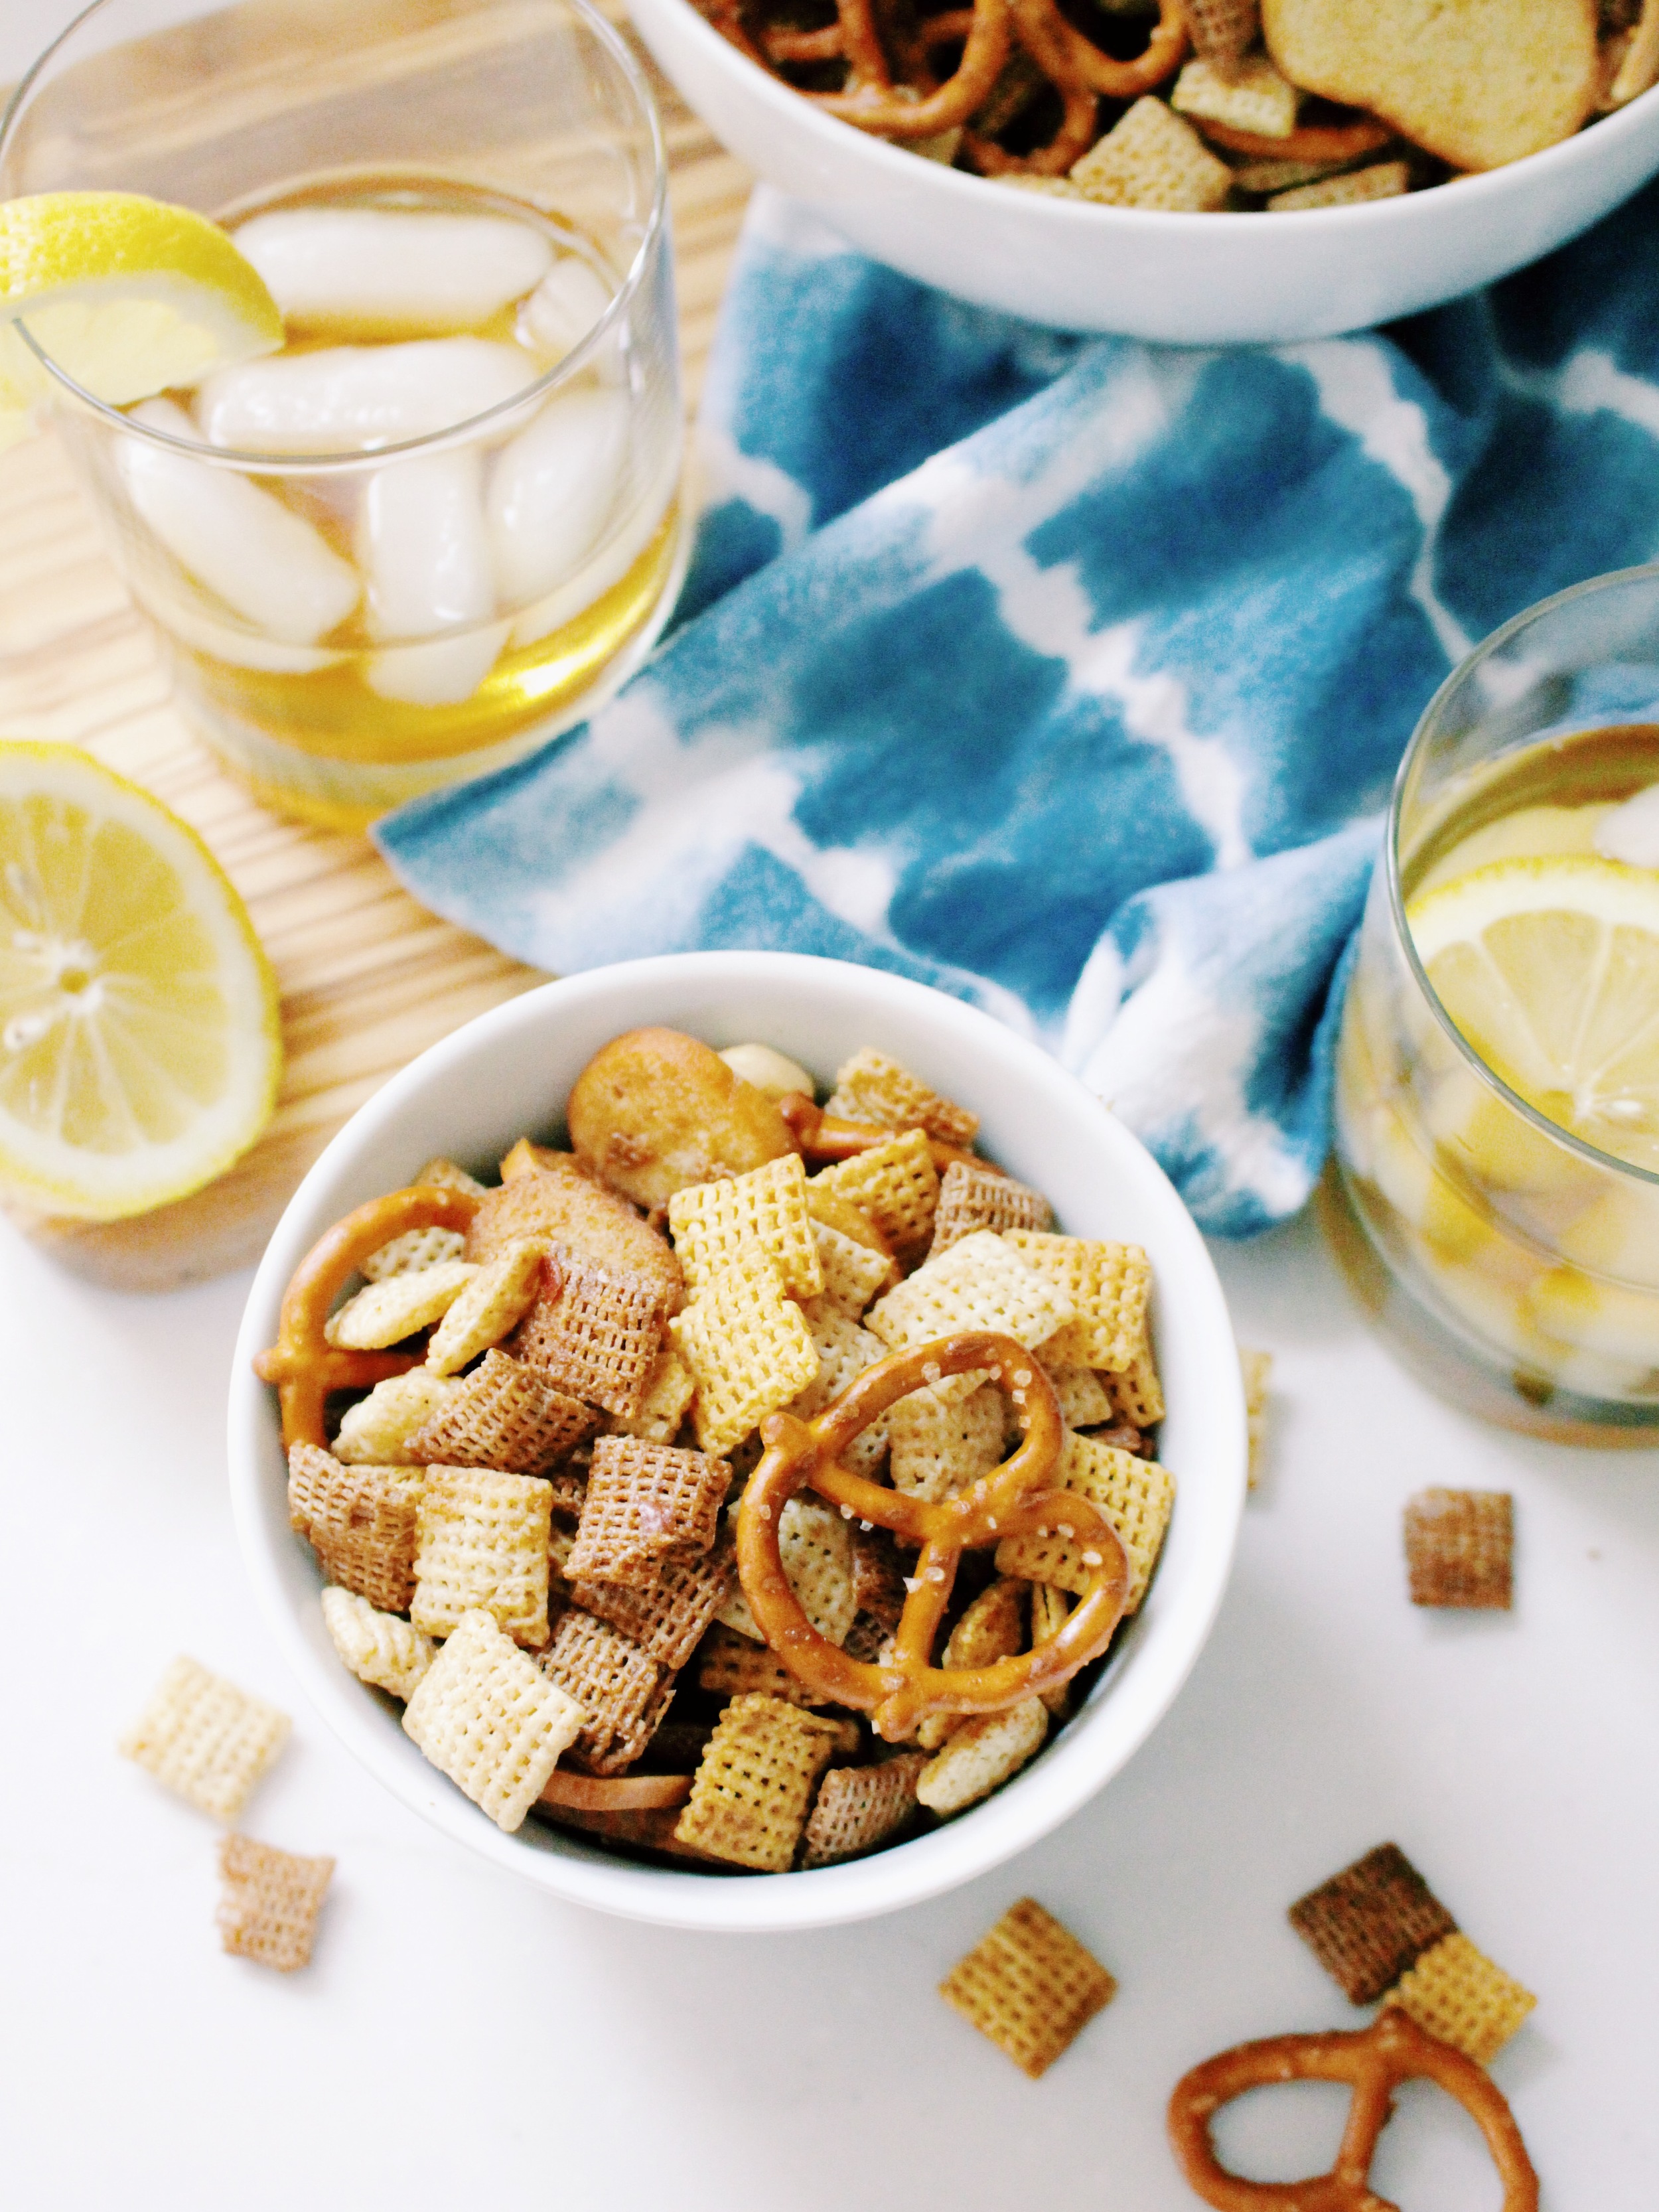 HOMEMADE BAKED CHEX MIX RECIPE